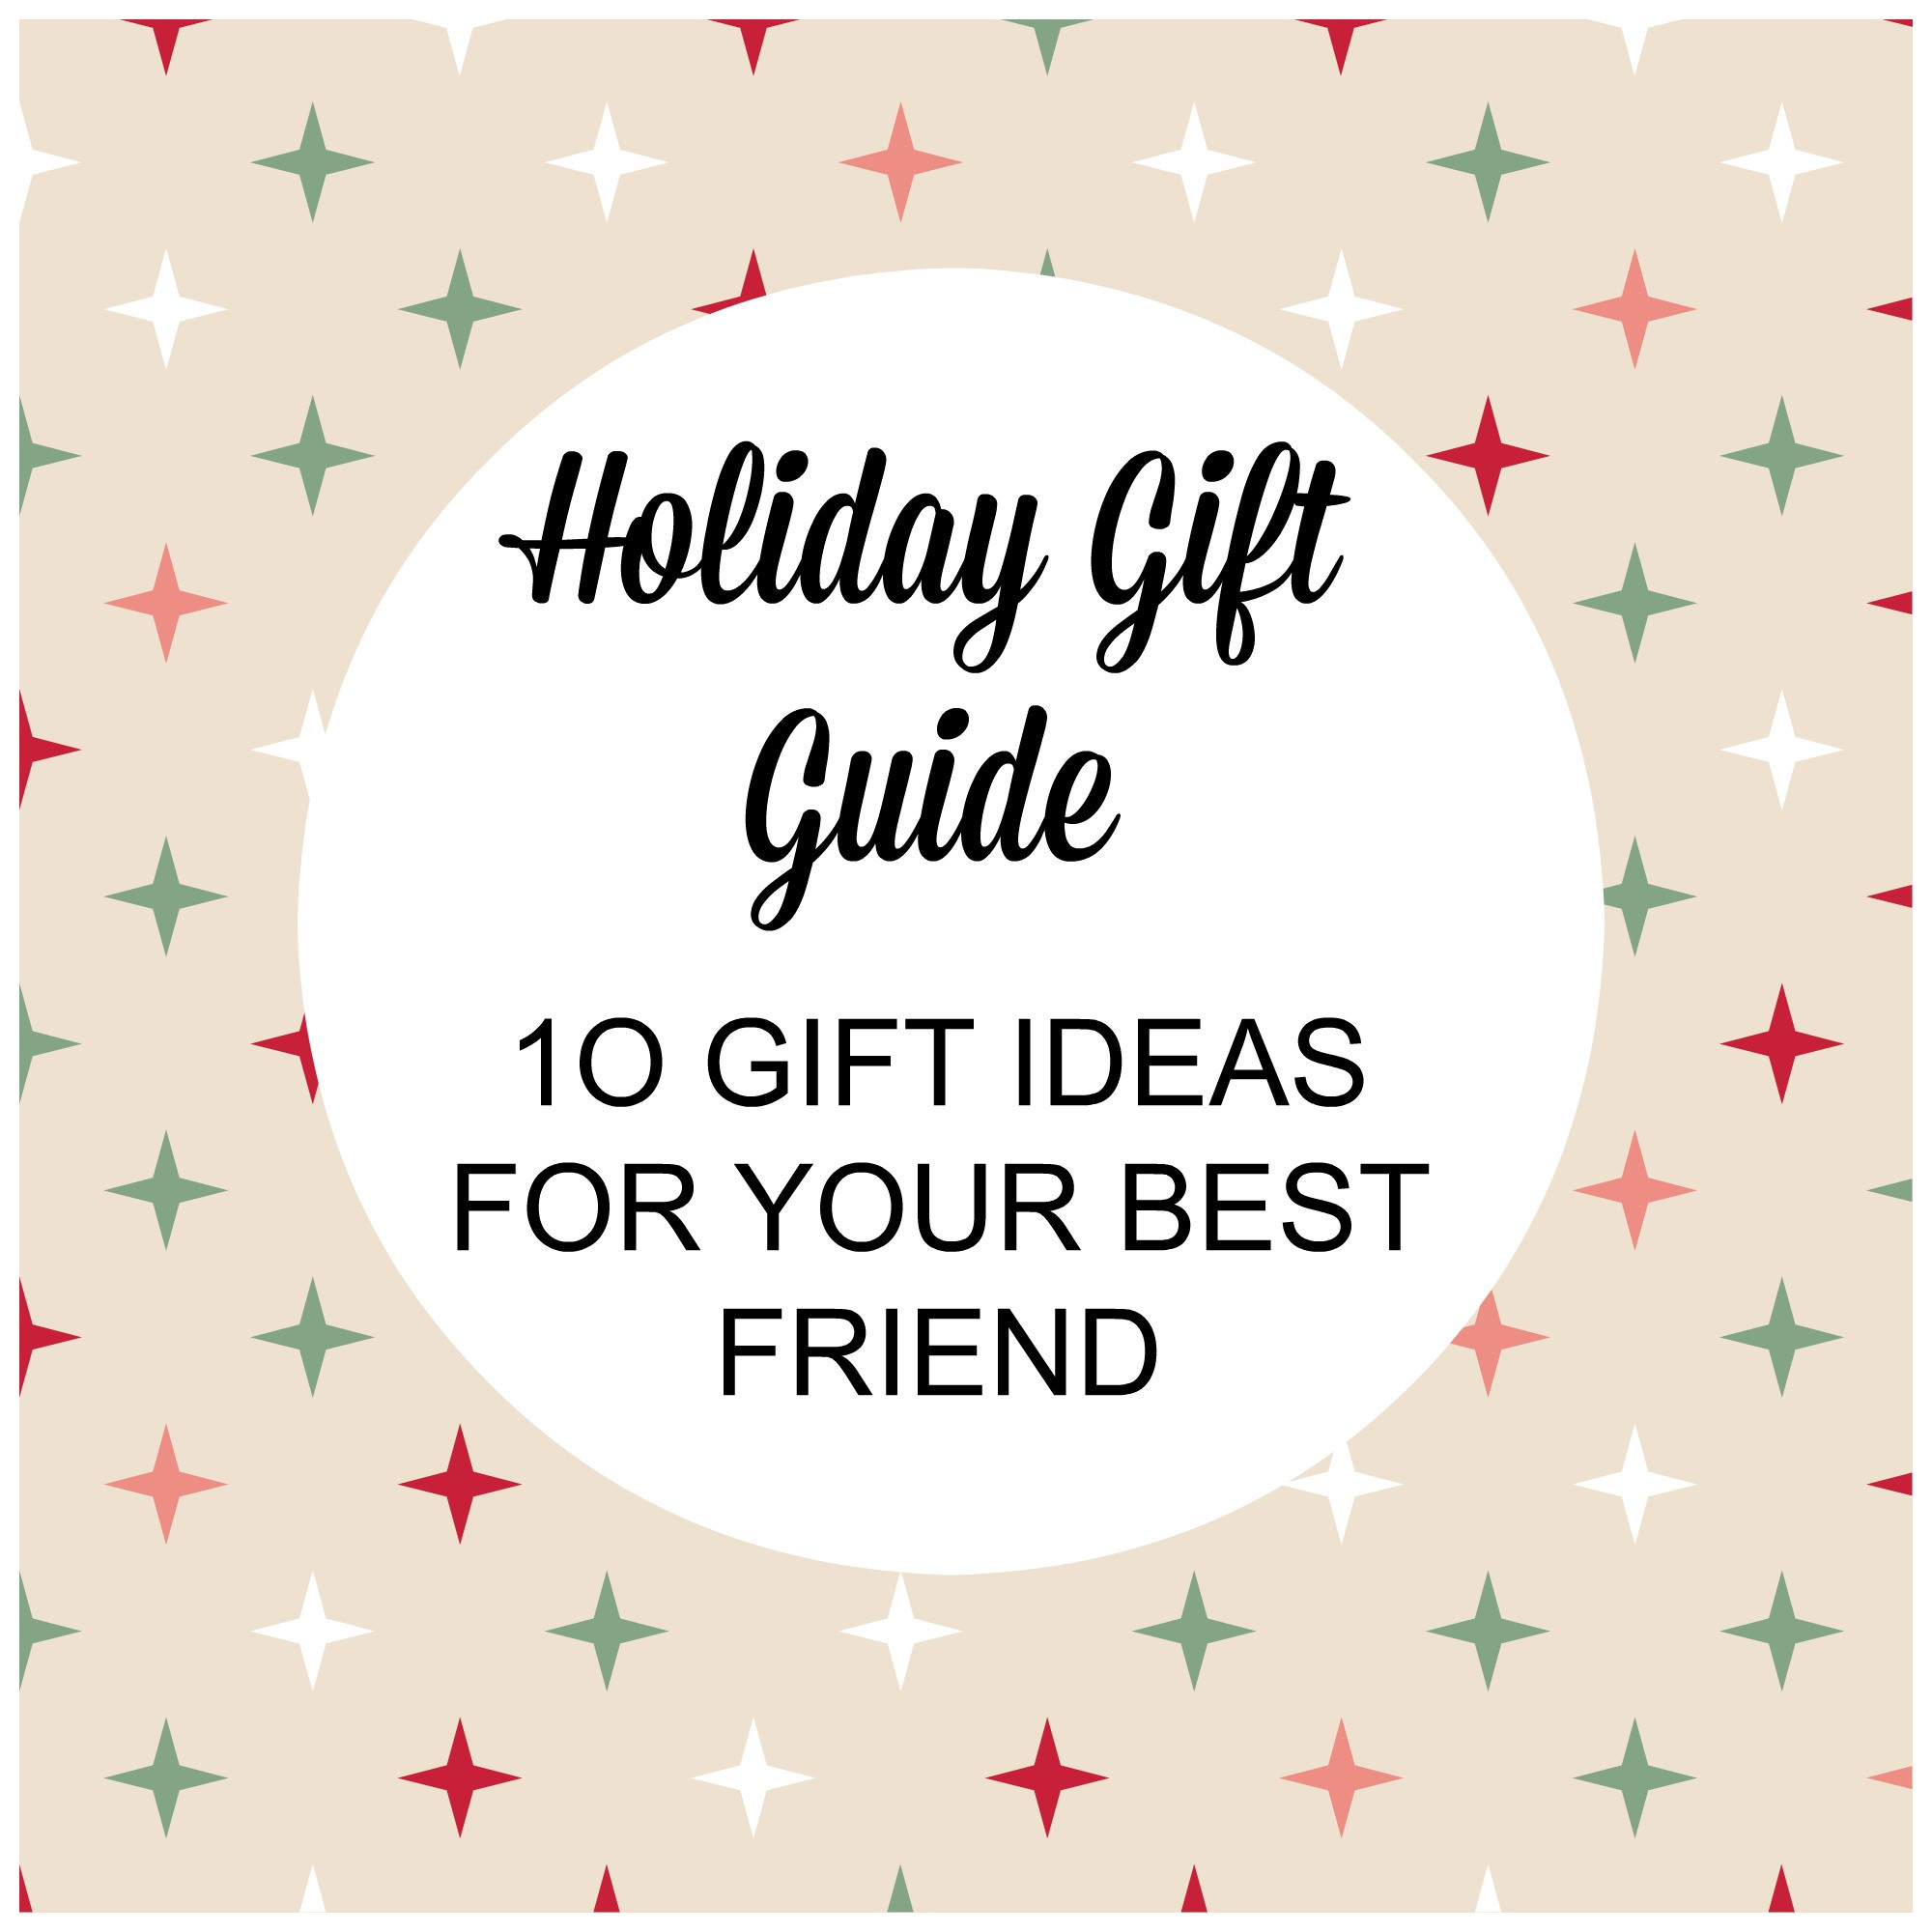 Christmas Gift Ideas For Your Best Friends
 Holiday Gift Guide 10 Gift Ideas for your Best Friend